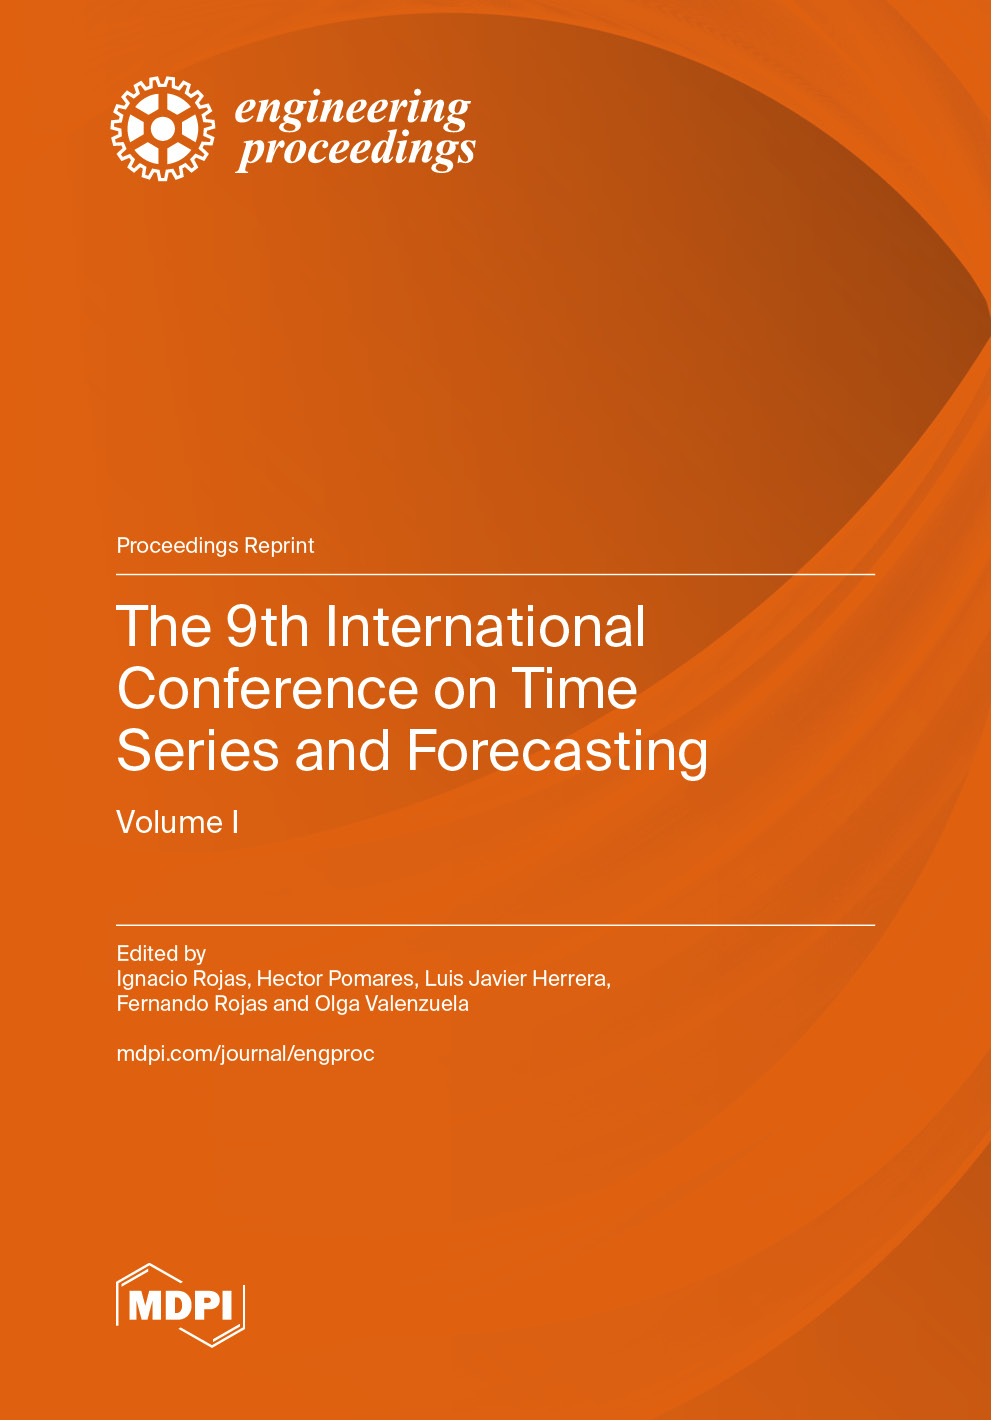 The 9th International Conference on Time Series and Forecasting